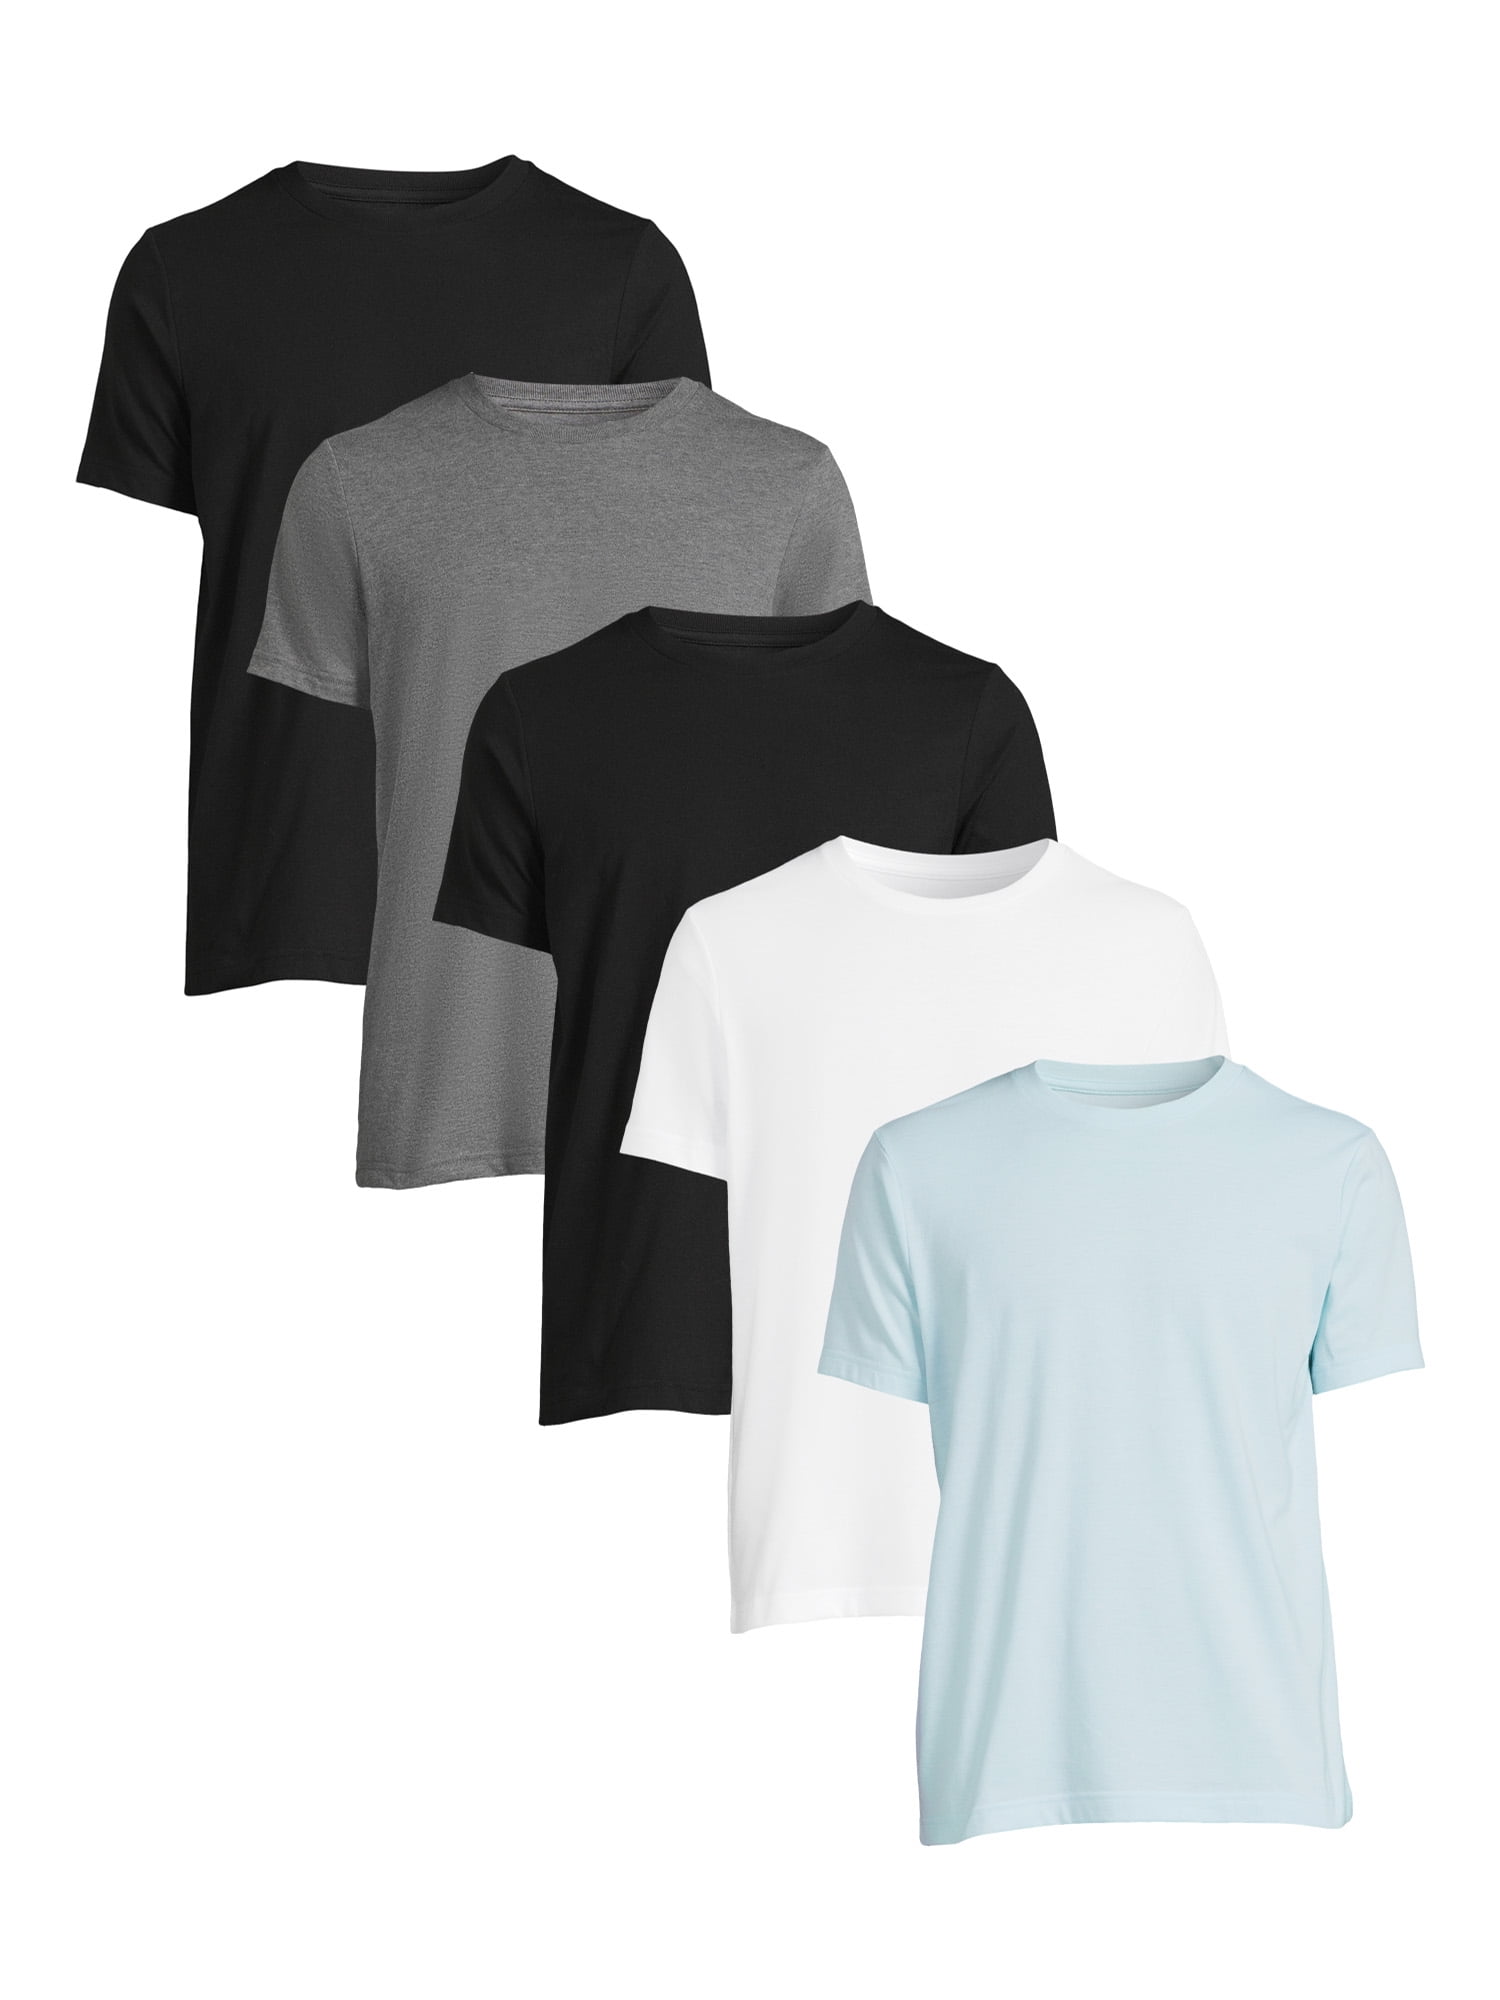 George Men's and Big Men's Crew Tee with Short Sleeves, 5-Pack, Sizes ...